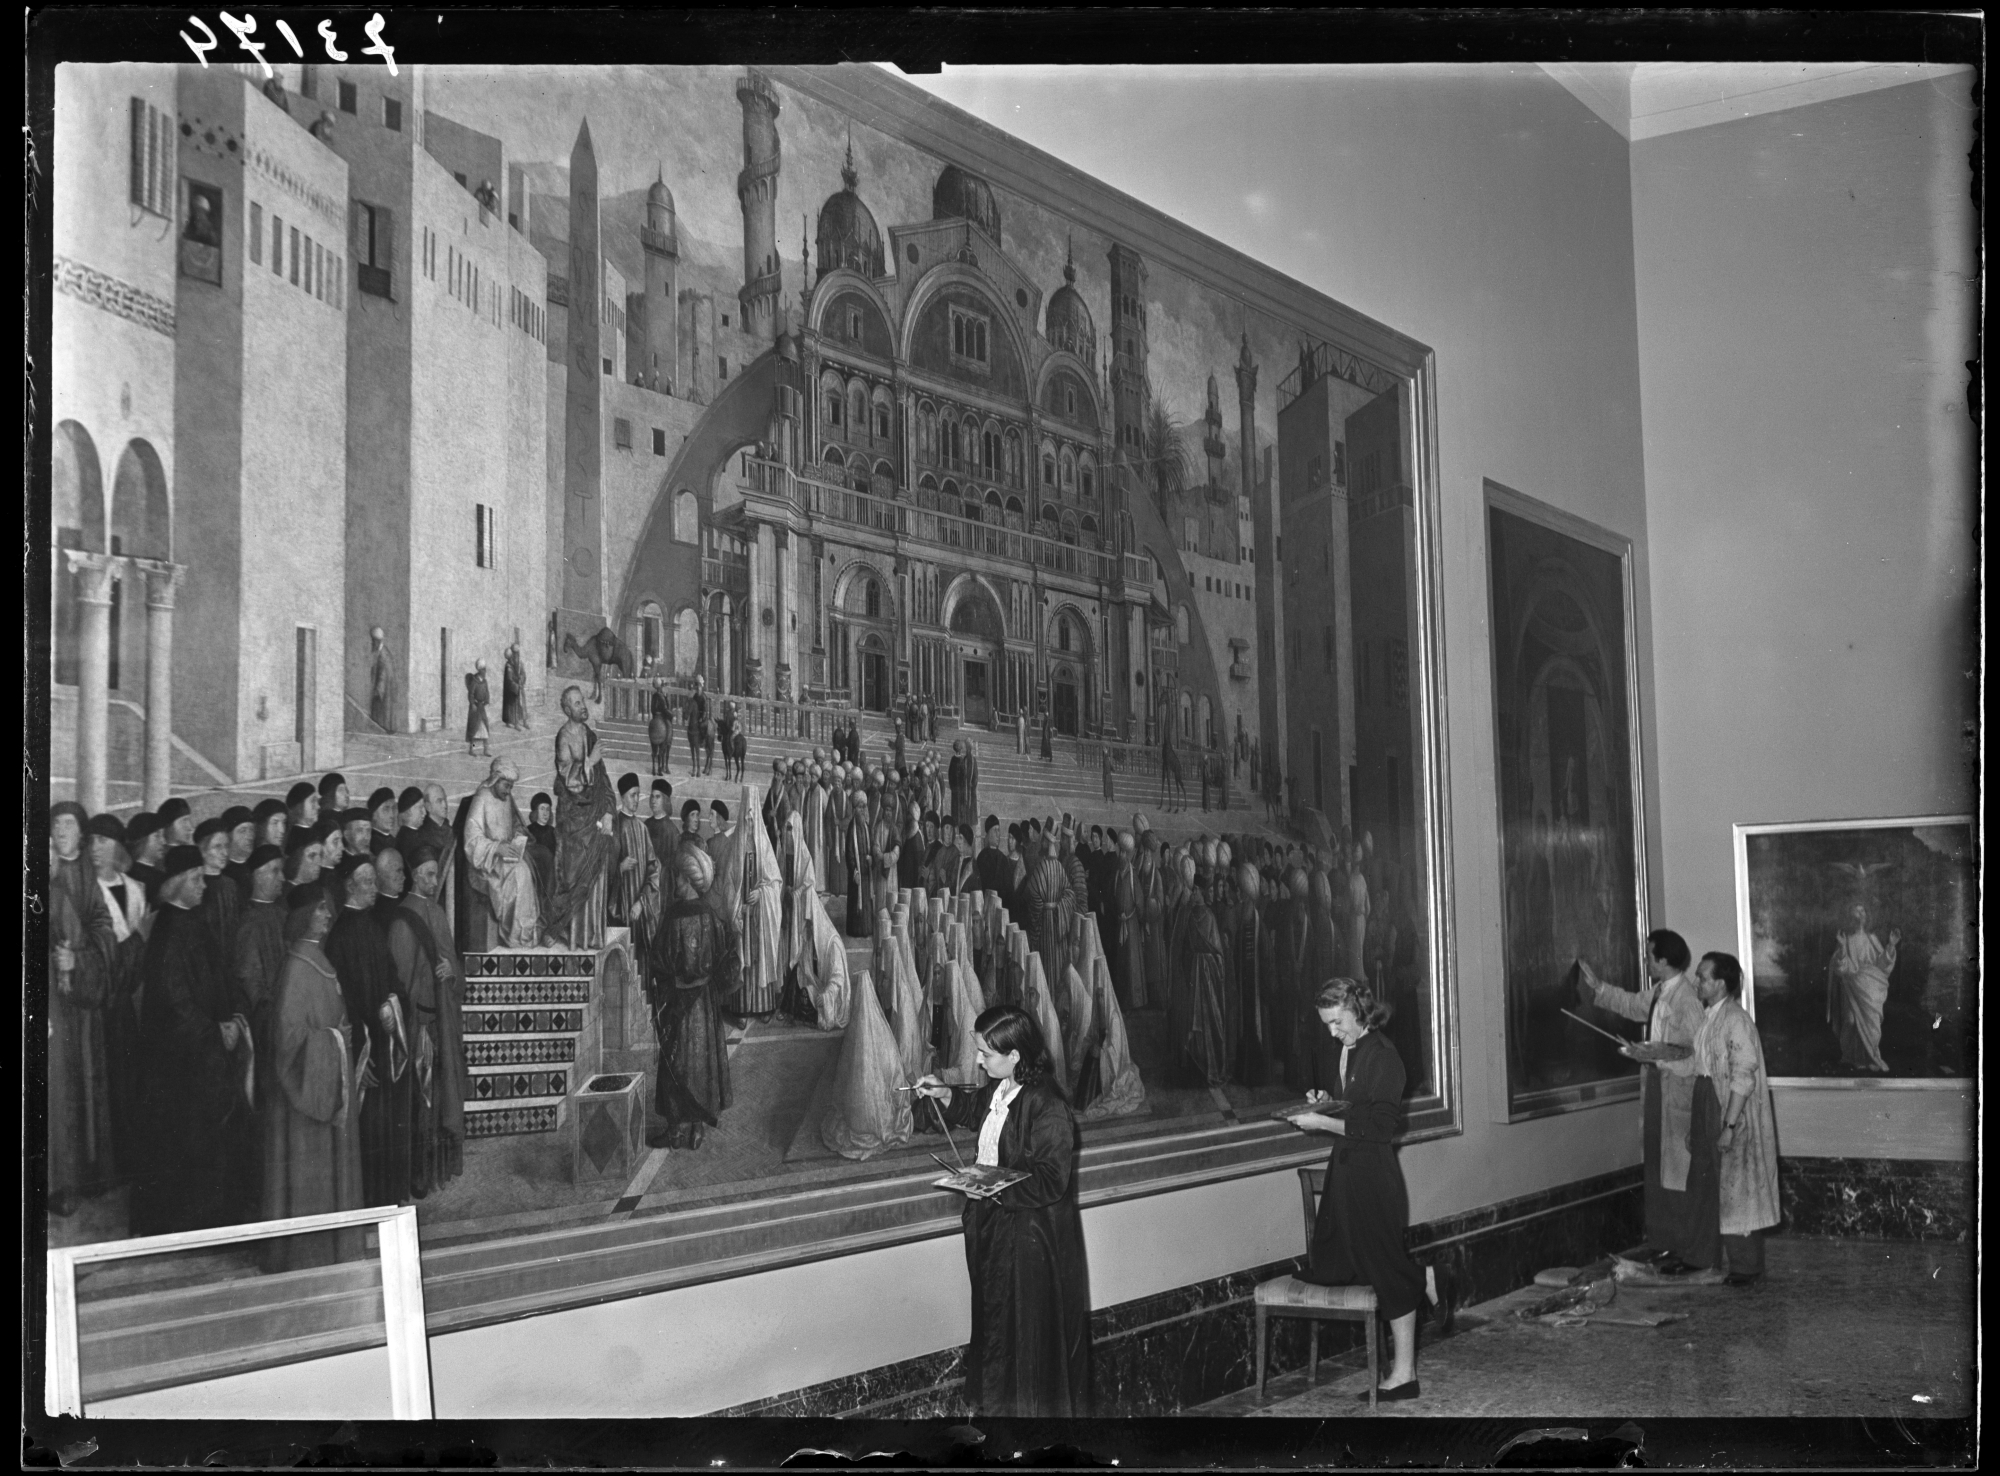 Restorers at work on the painting by Gentile Bellini and Giovanni Bellini "Predica di San Marco in una piazza di Alessandria d’Egitto", for the reopening of the Brera Art Gallery after the war, 1 June 1950